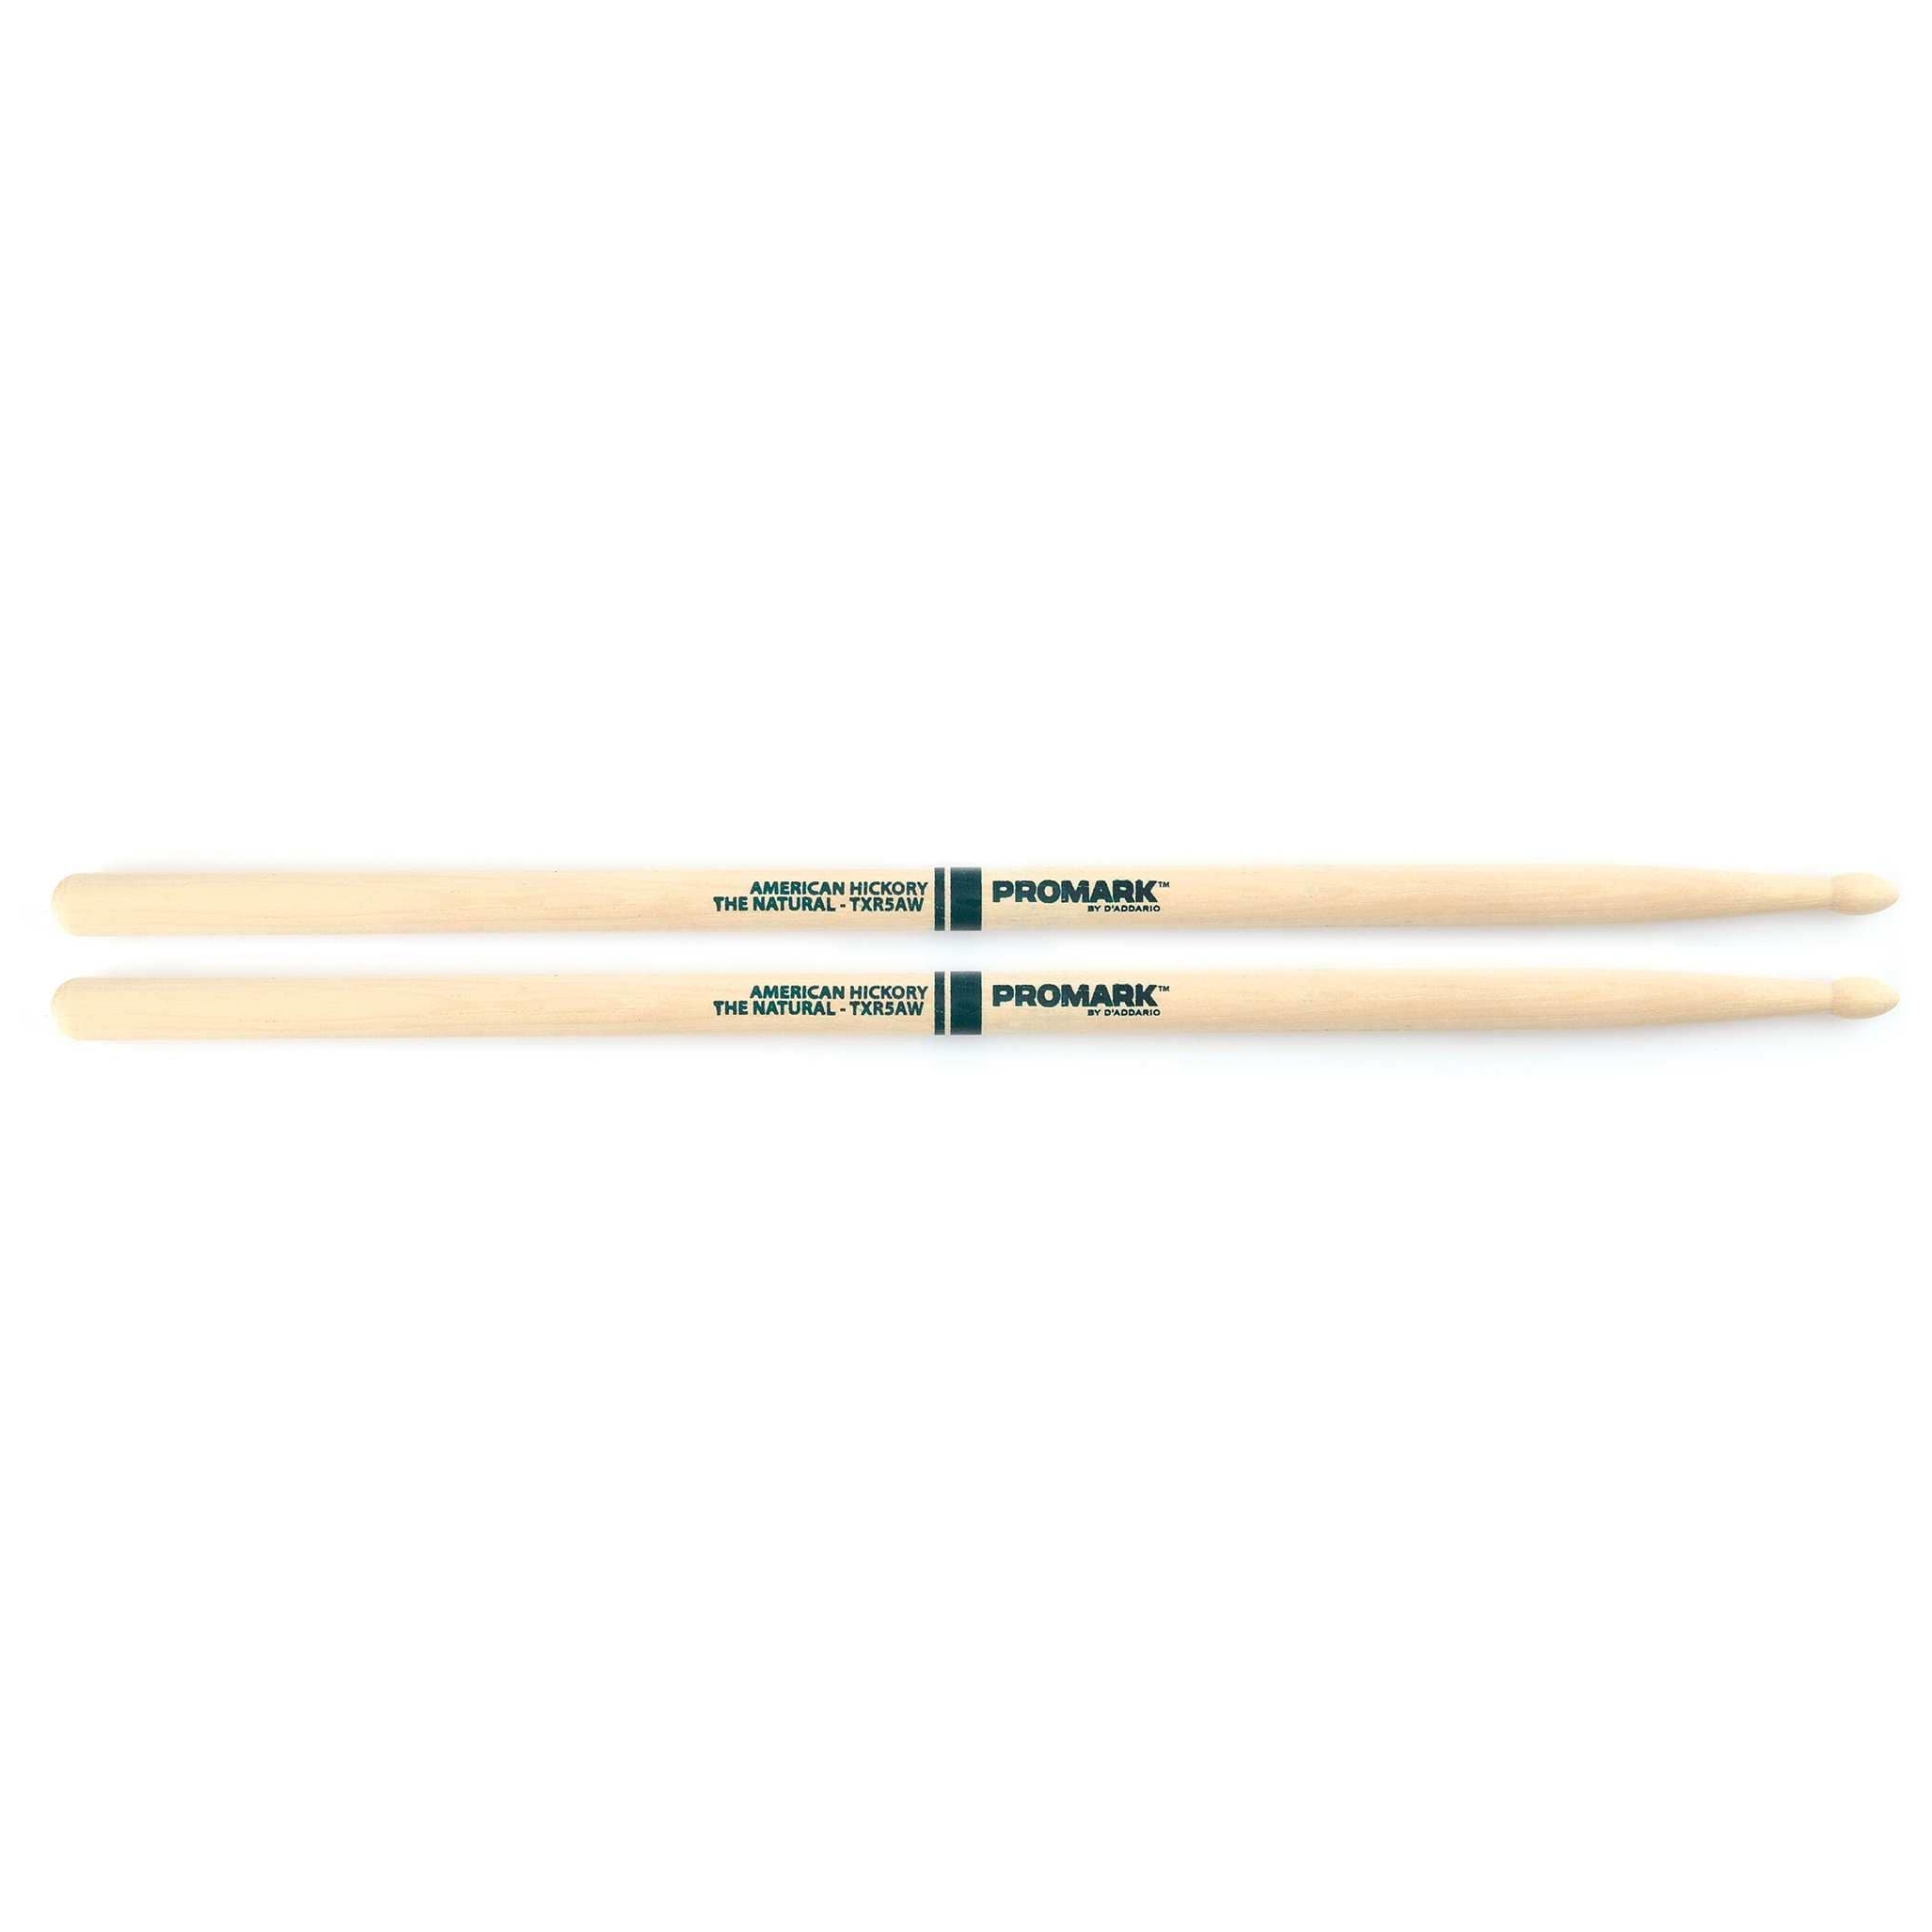 ProMark 5A The Natural - Hickory - Wood tip shape (TXR5AW)